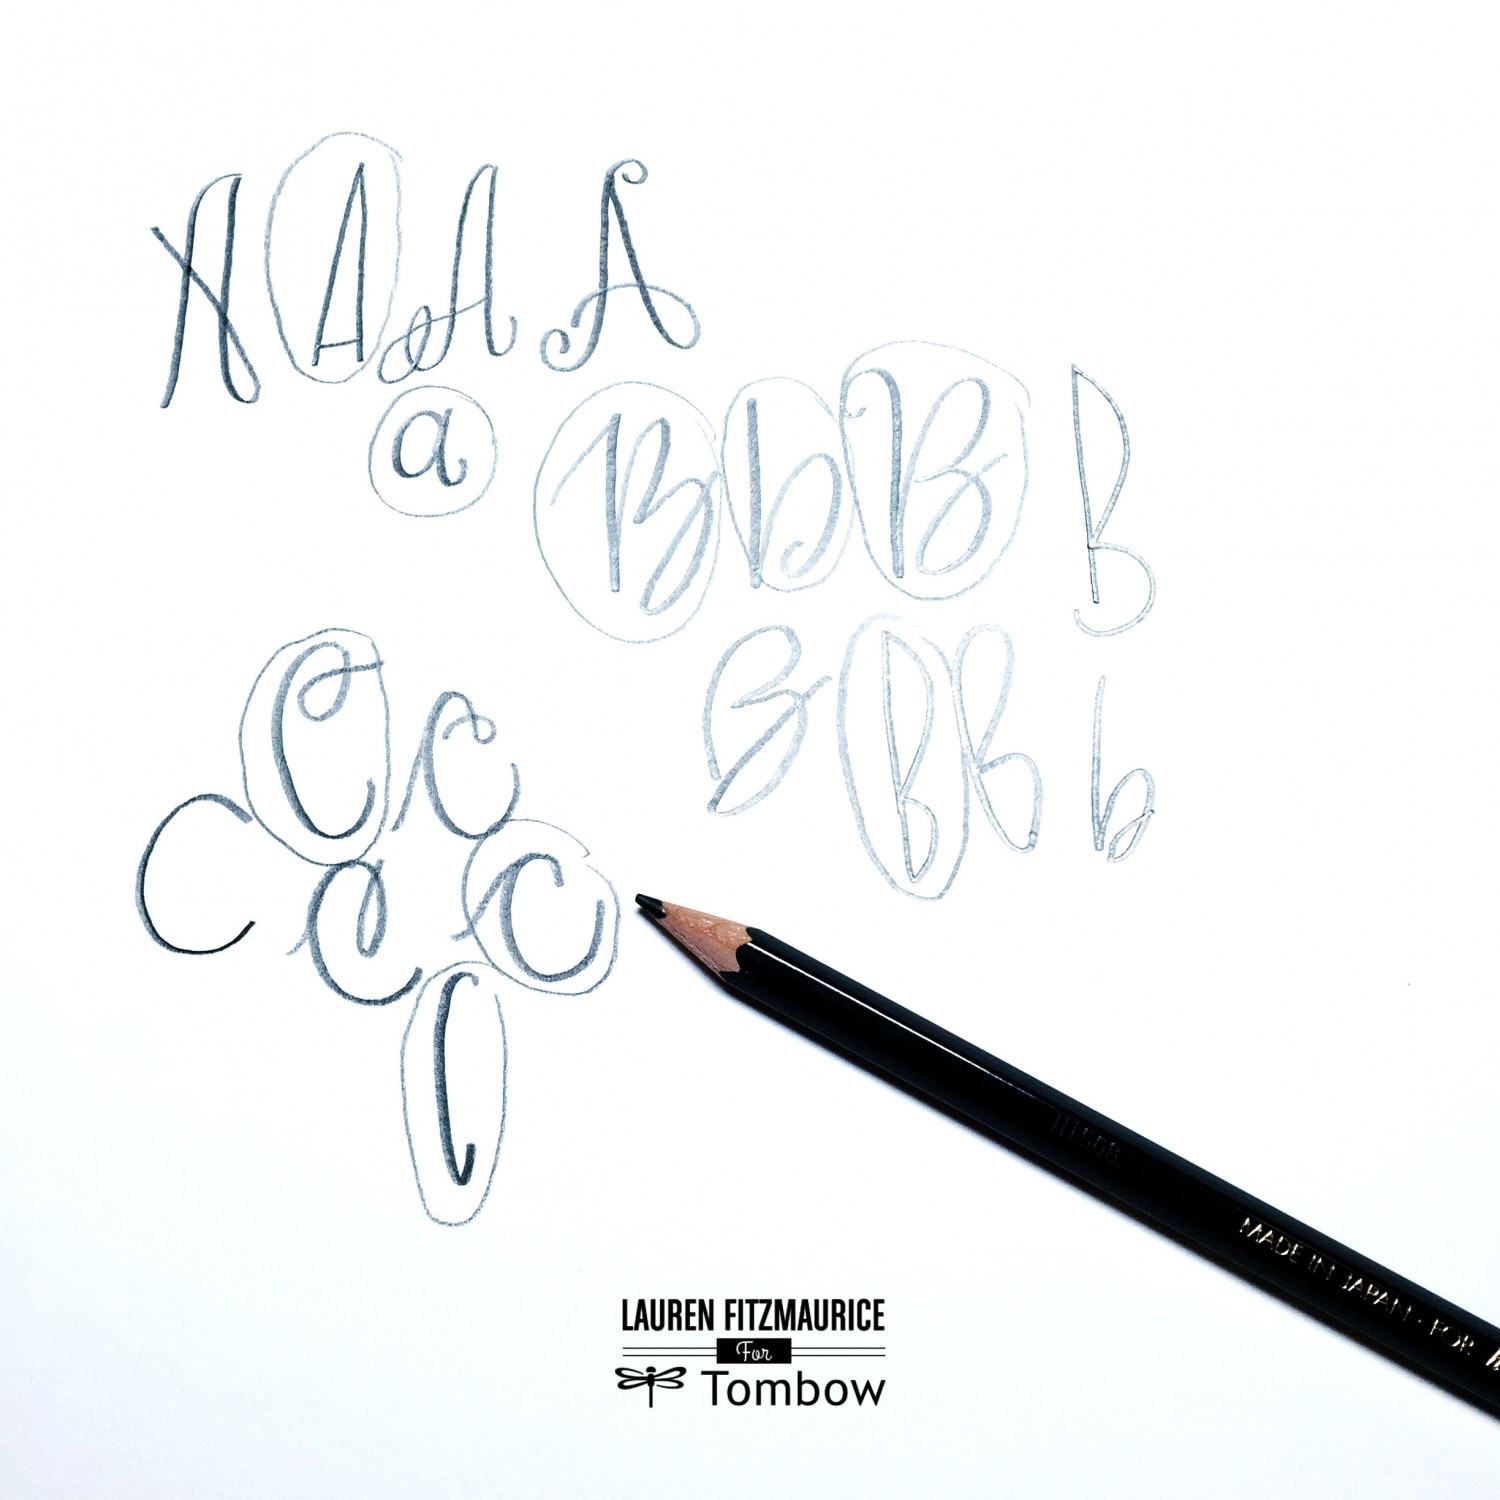 Create Your Own Lettering Style in 5 Easy Steps